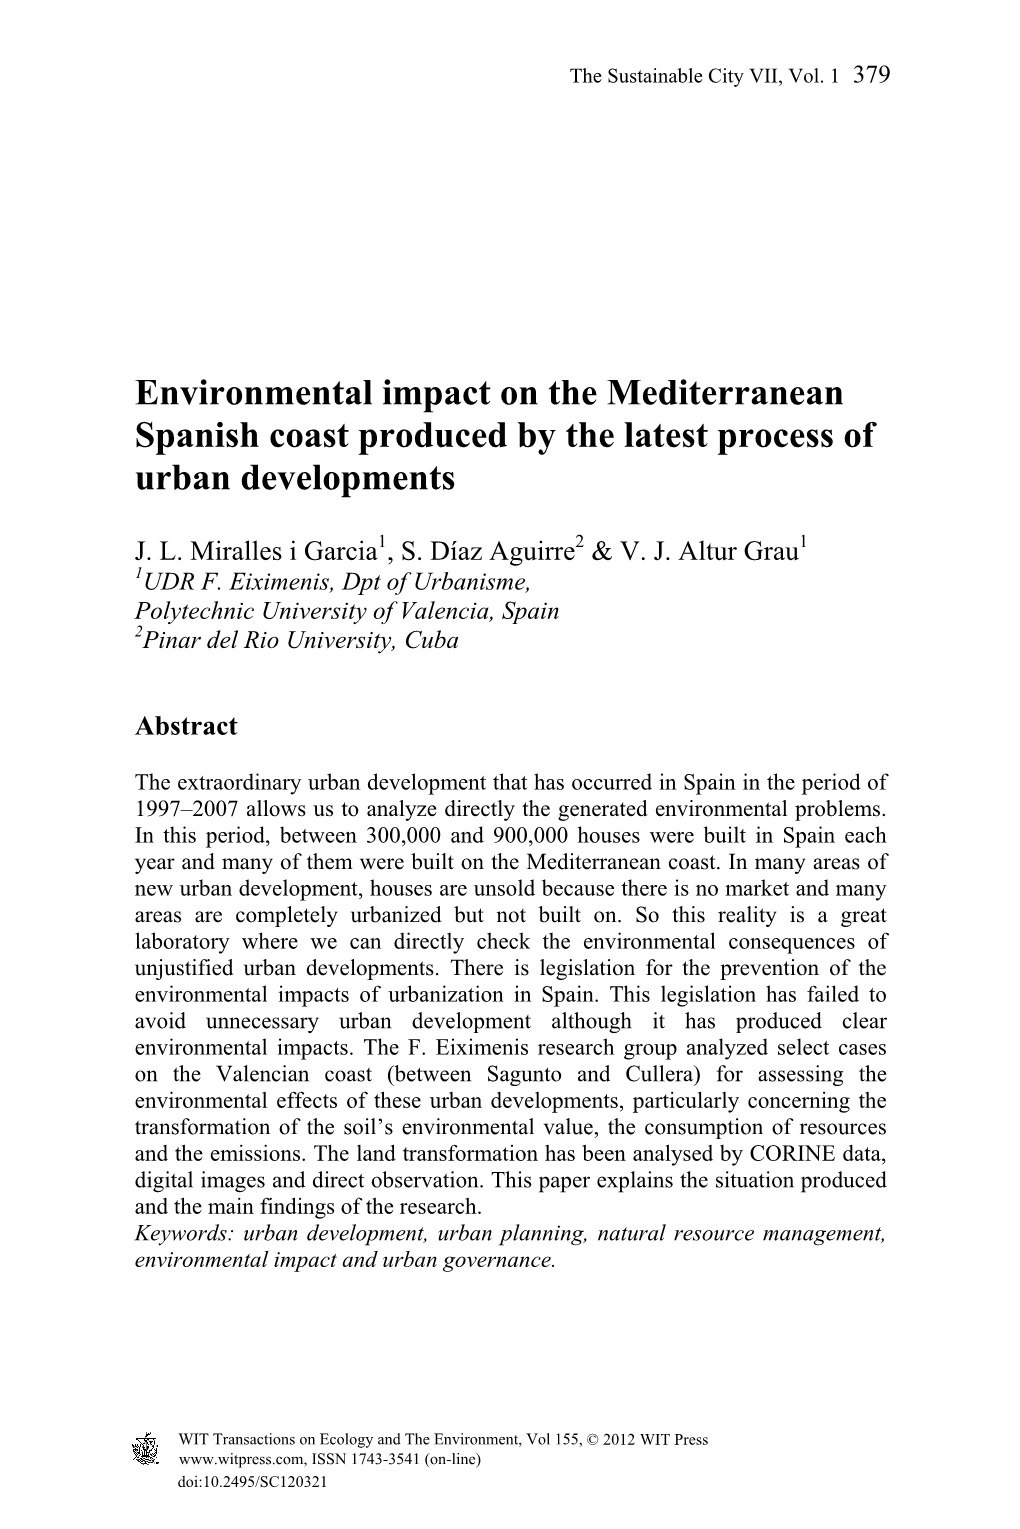 Environmental Impact on the Mediterranean Spanish Coast Produced by the Latest Process of Urban Developments